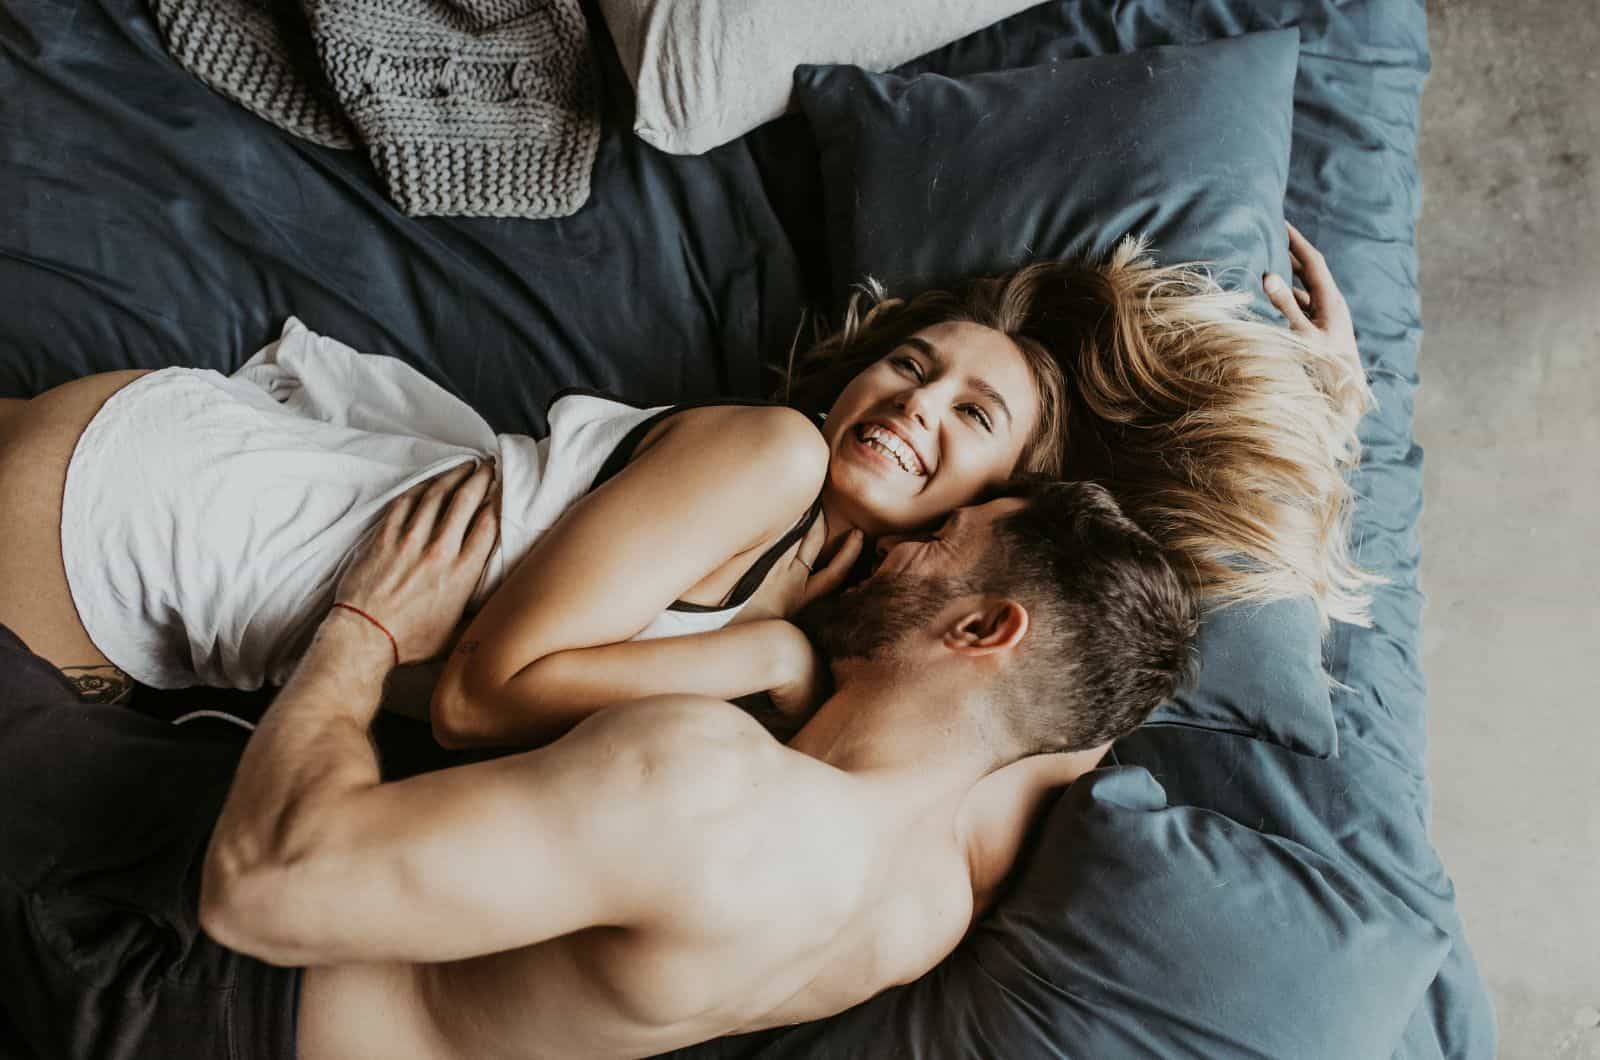 shirtless man kissing woman's neck in bed while she's smiling